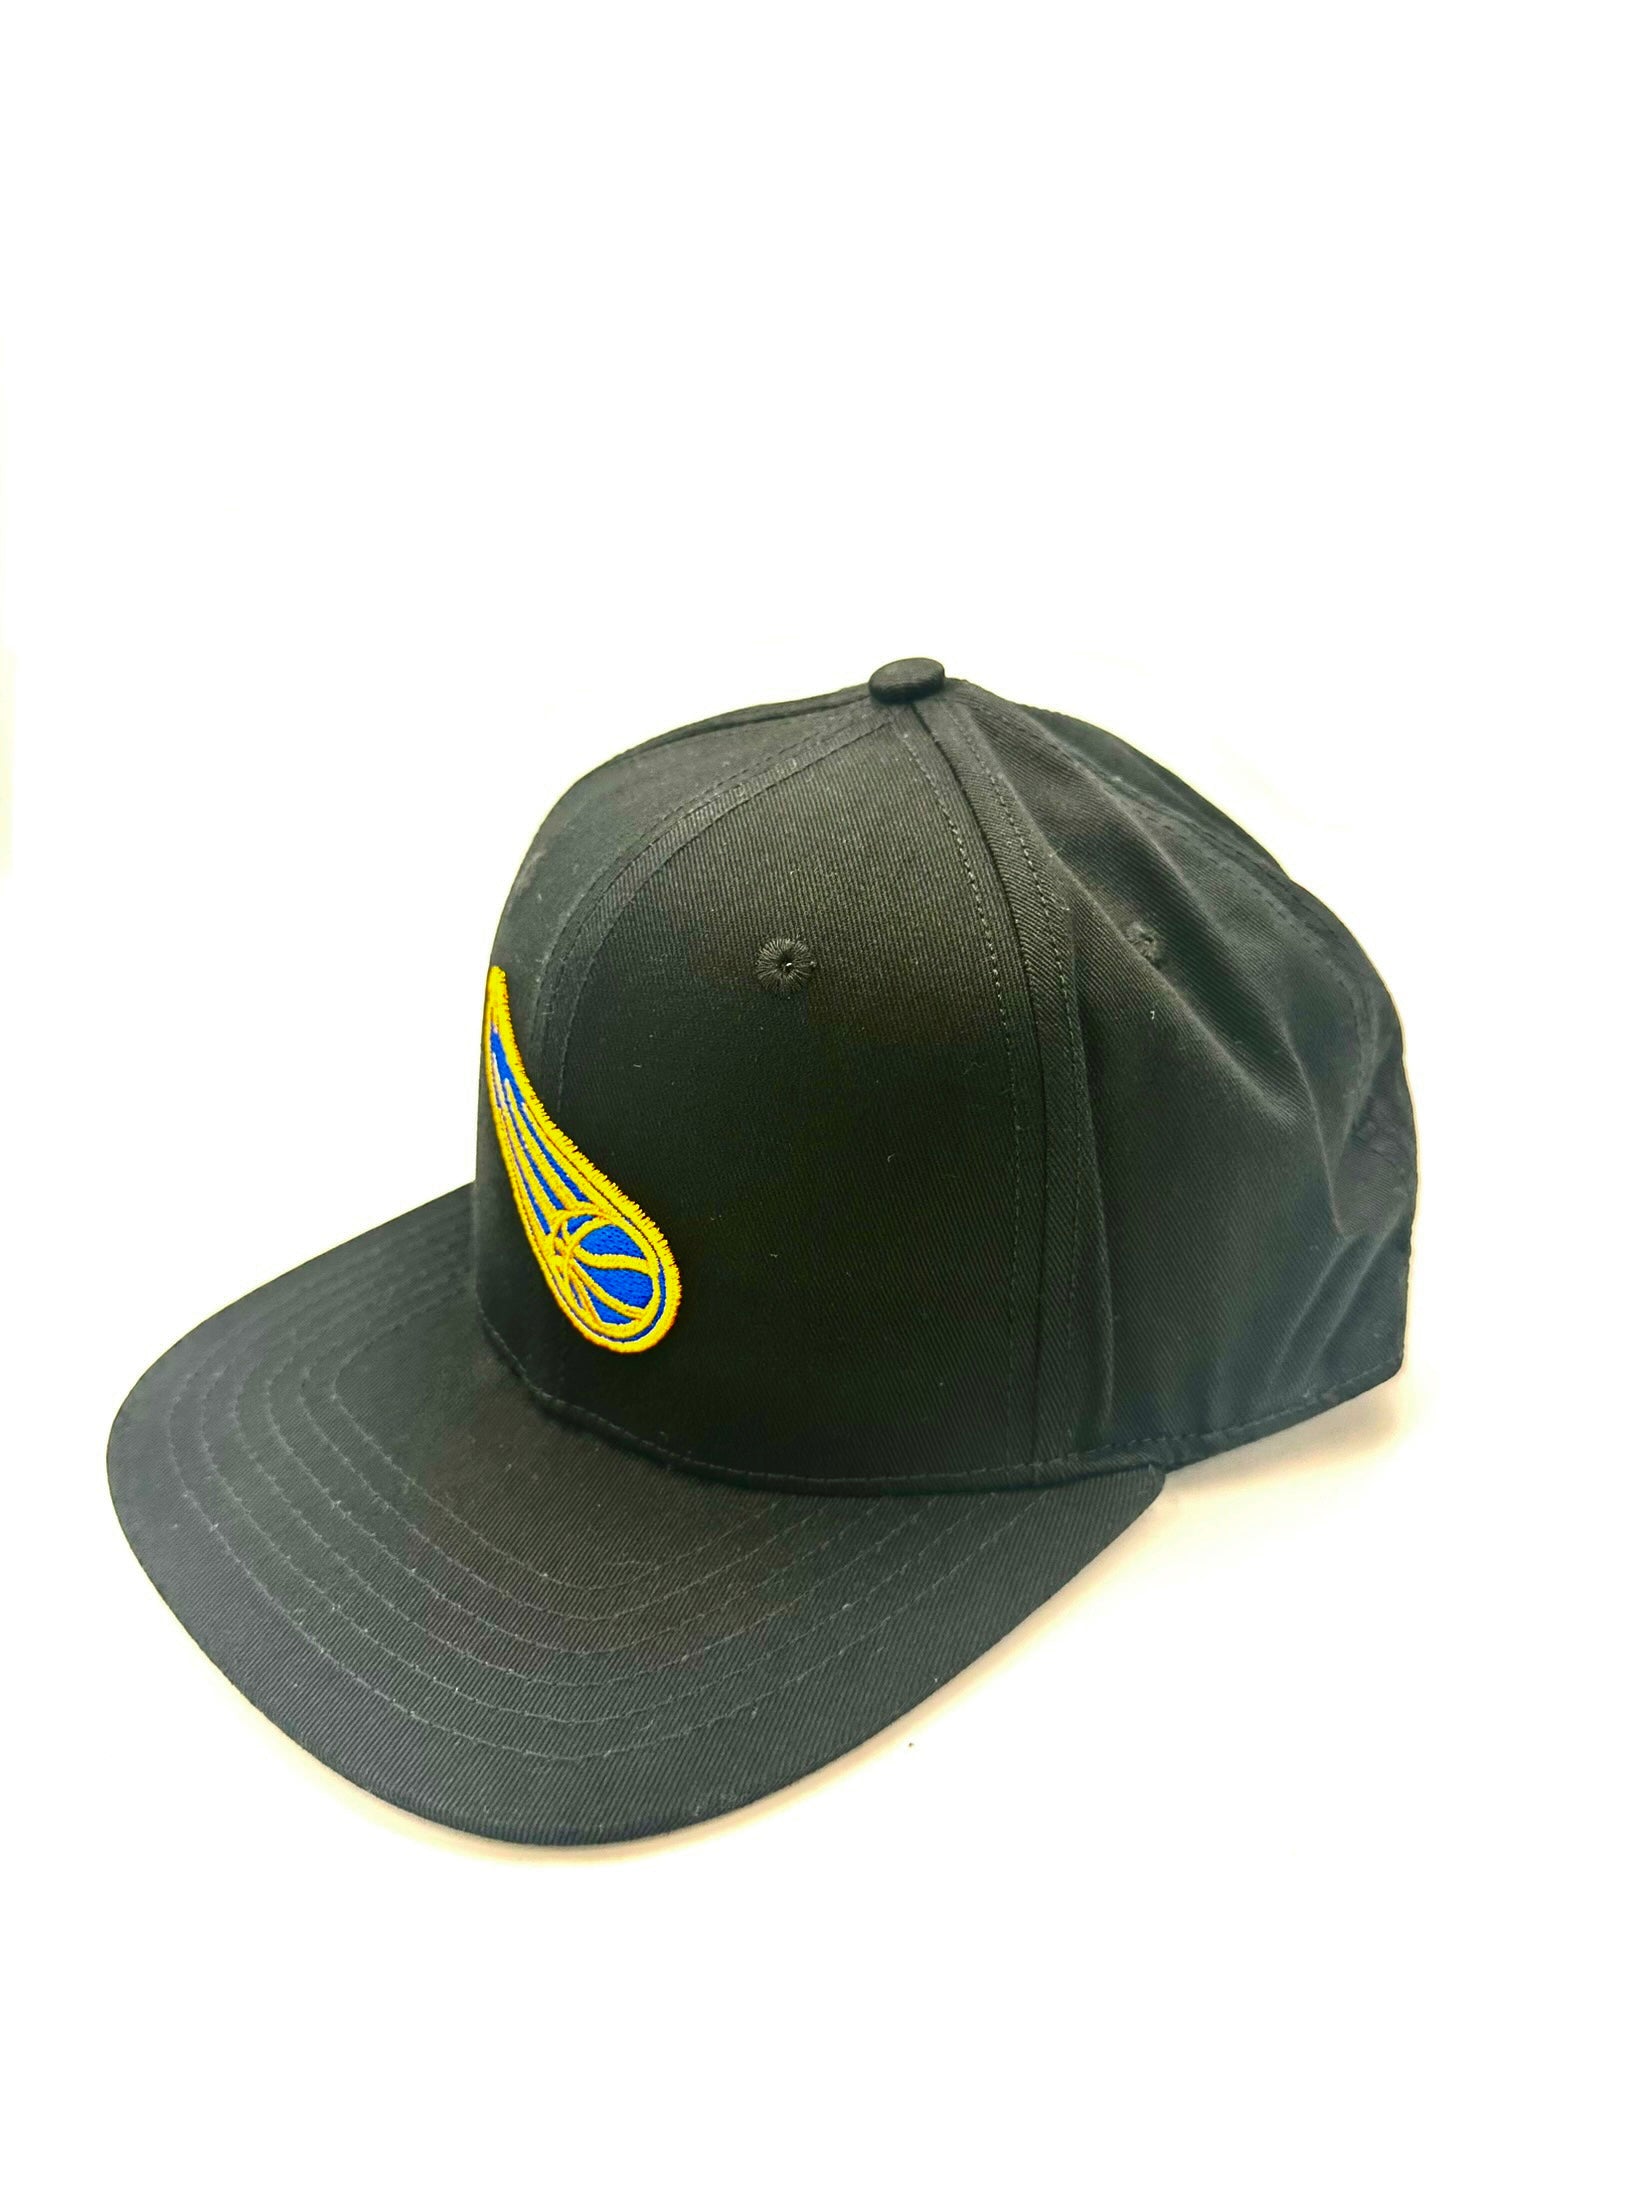 Brisbane Bullets Hat - Black Classic Icon Snapback - First Ever